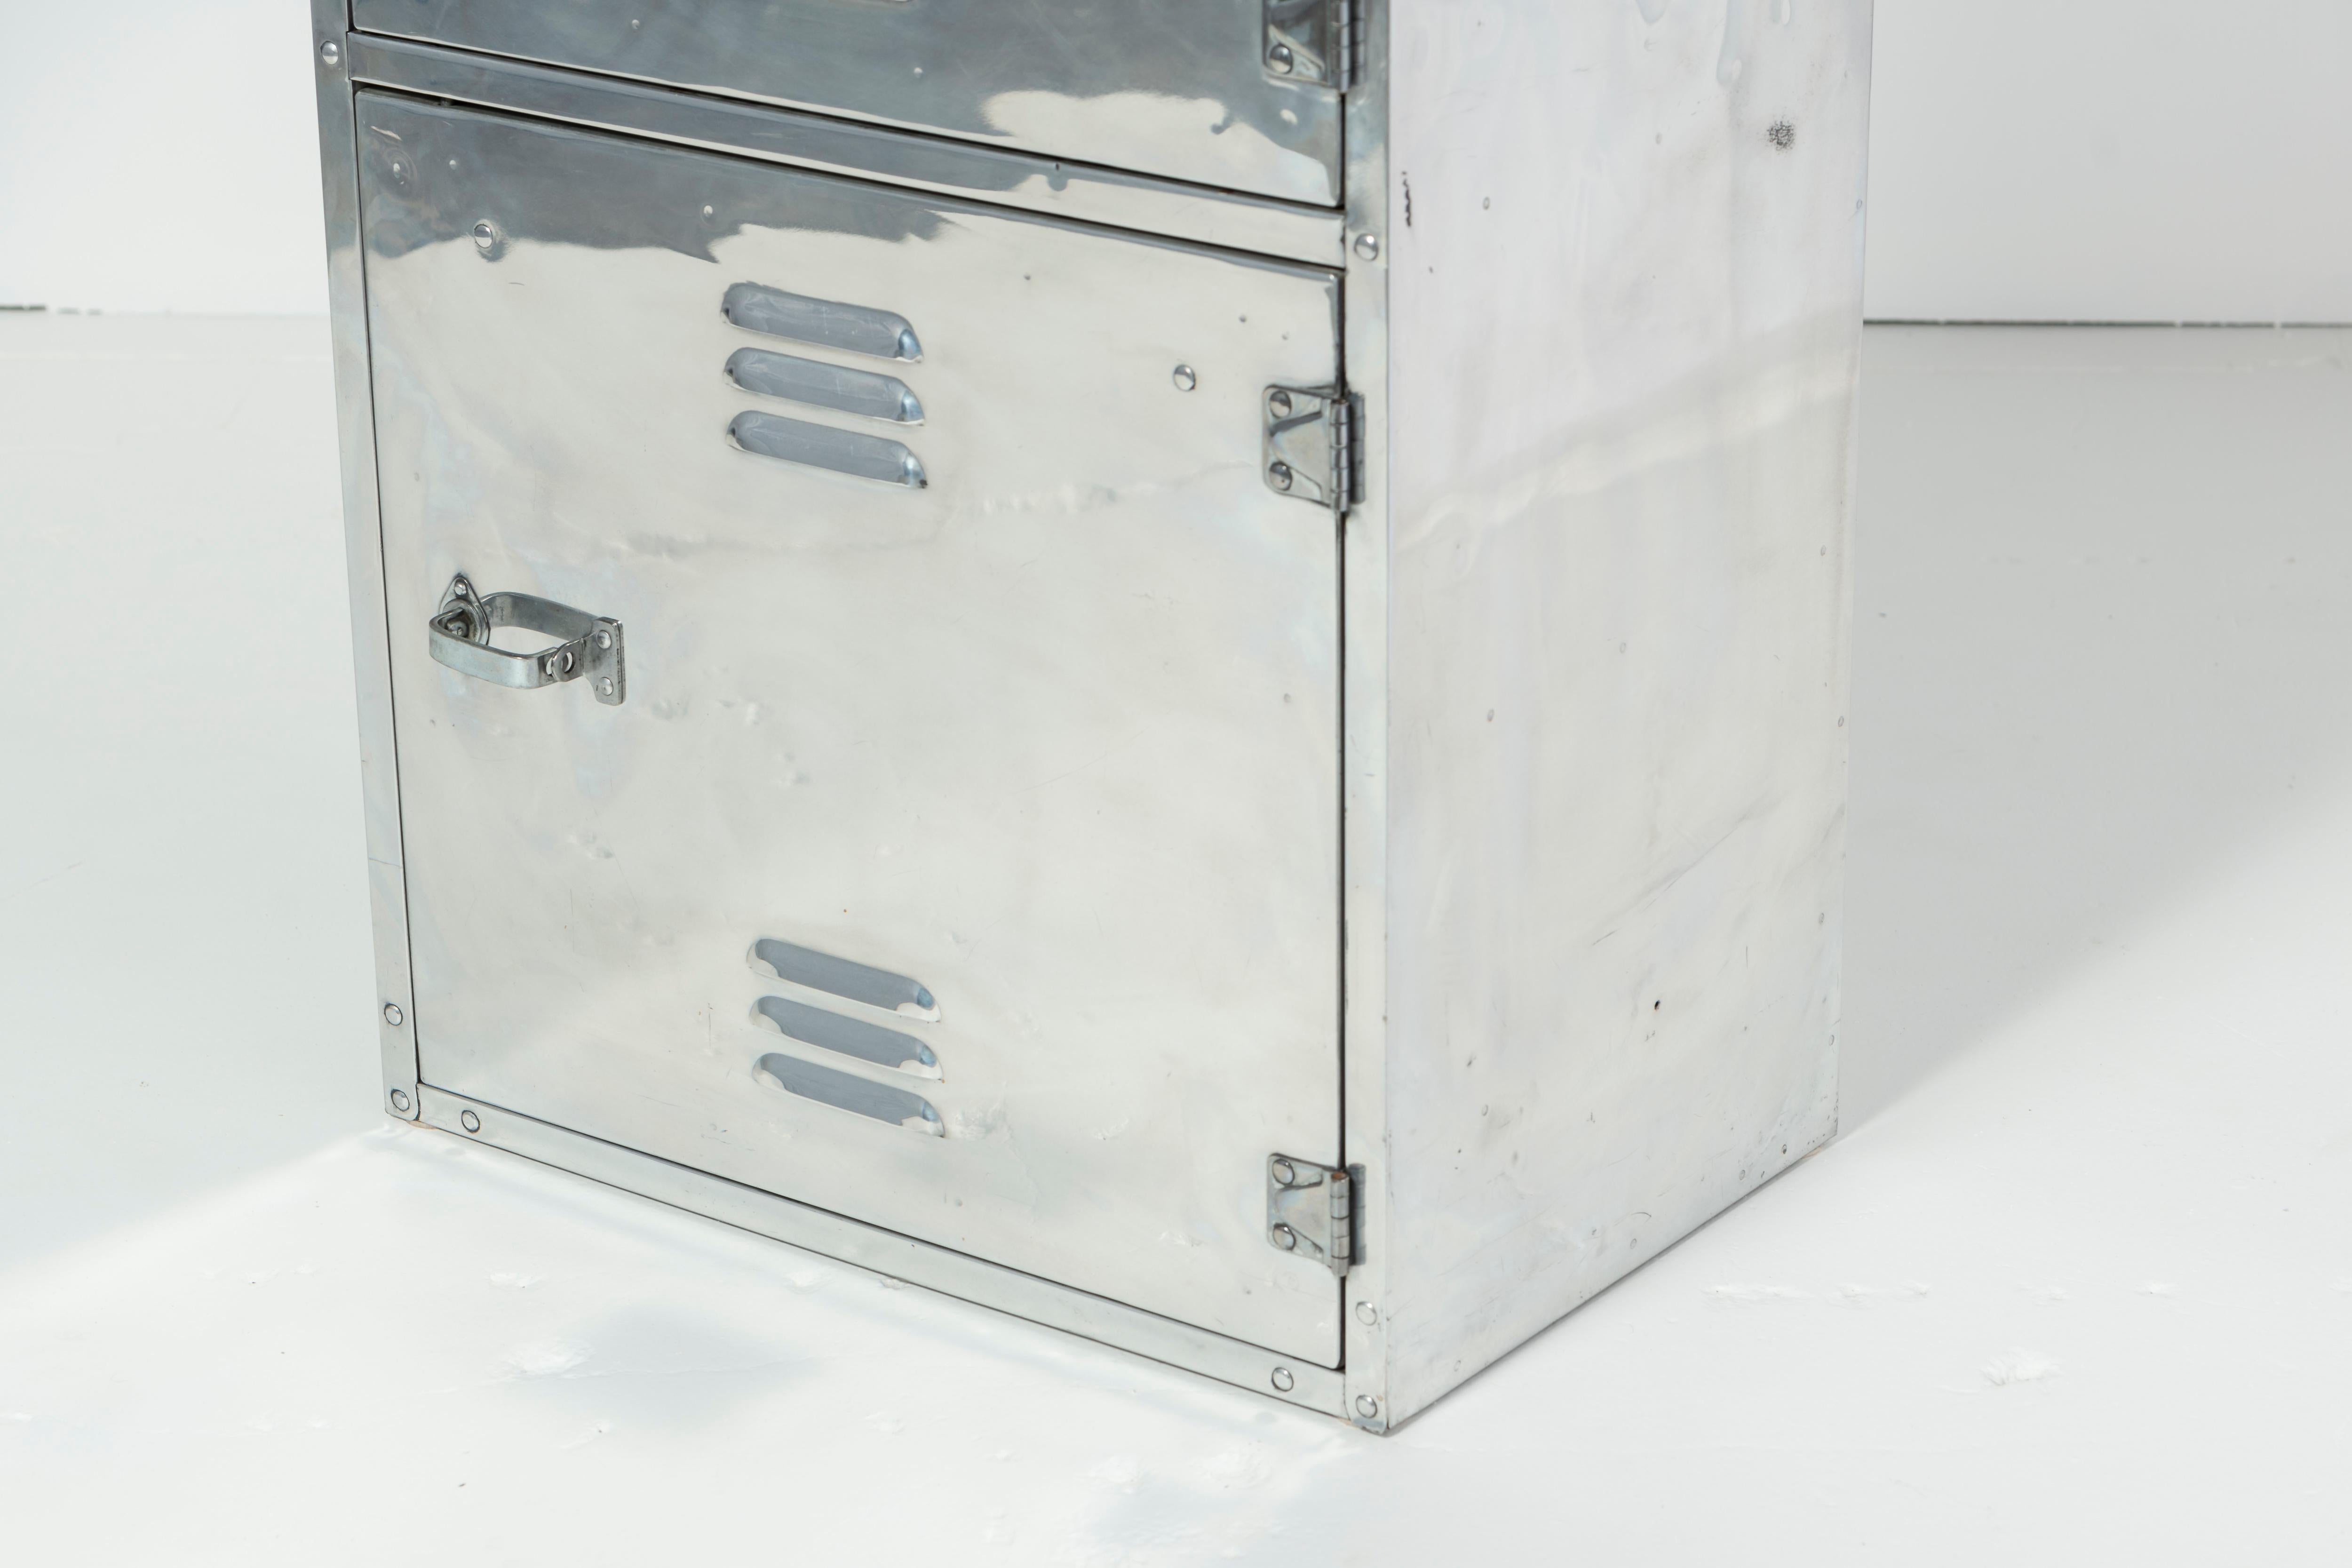 A 3-door polished aluminum foot locker. Behind each door are 2 drawers and 5 shelves. Very functional locker, serving a myriad of applications.